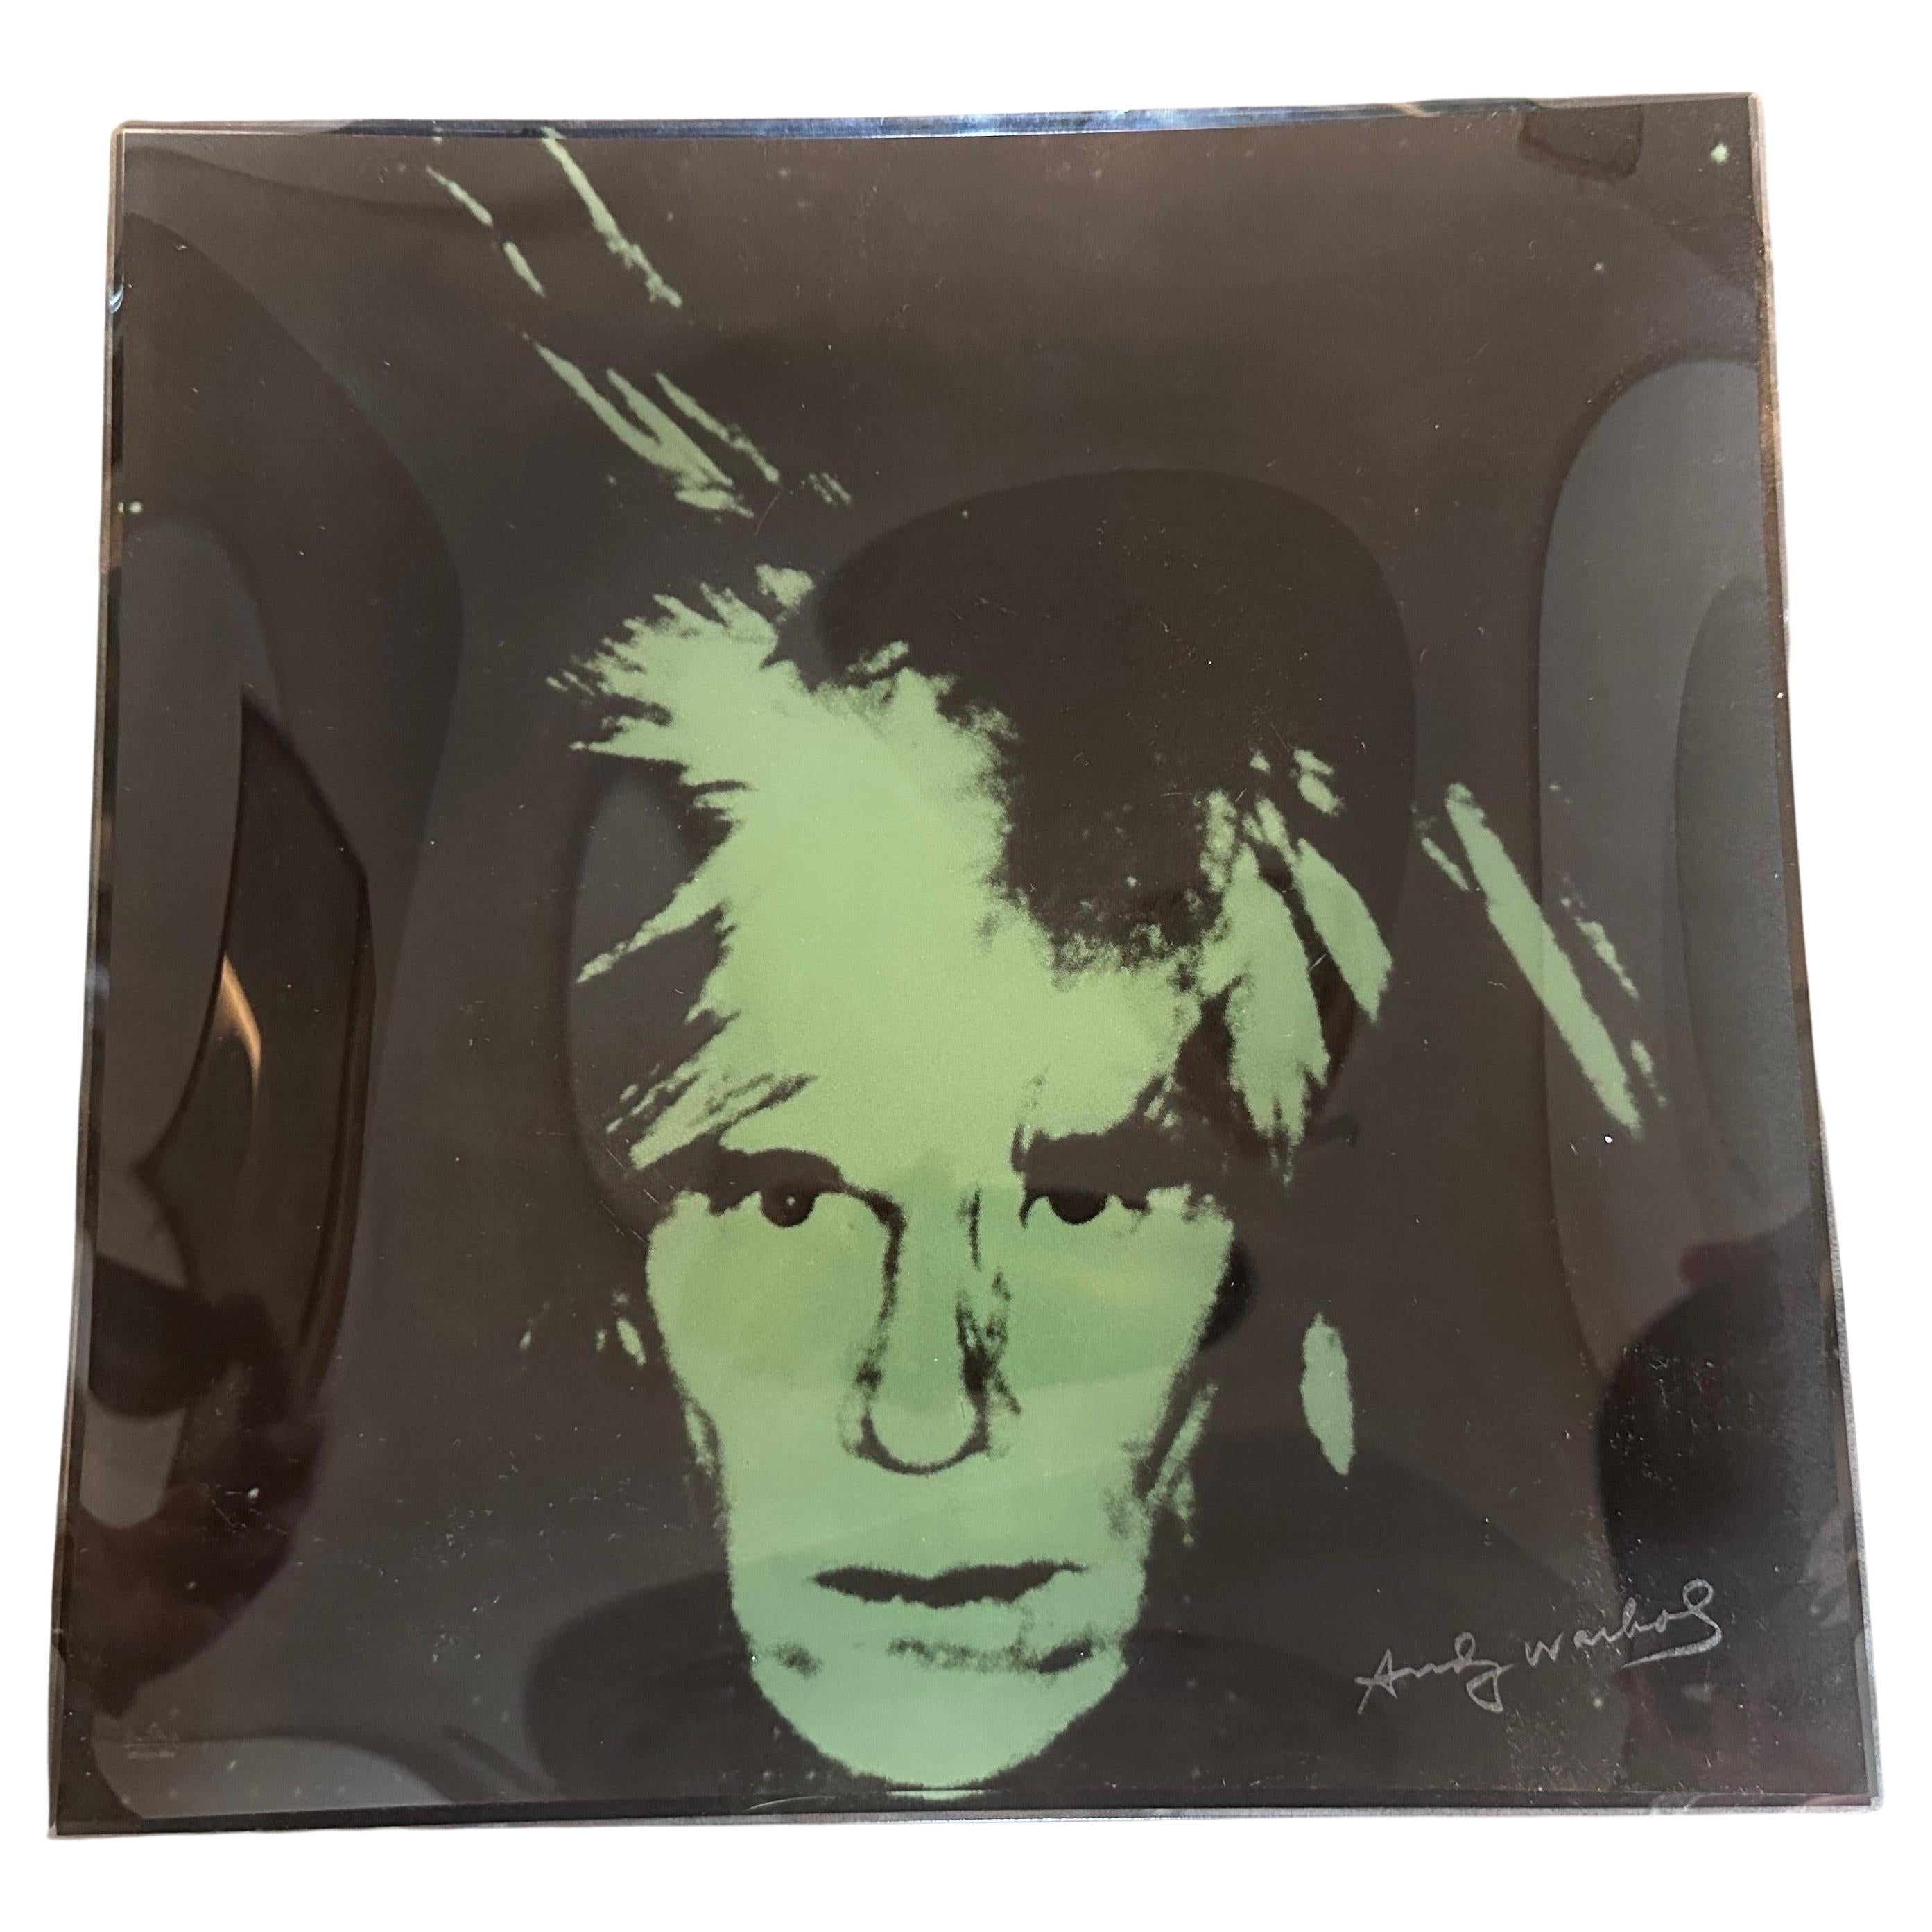 1990s Pop Art Andy Warhol Self Portrait Square Glass Tray by Rosenthal